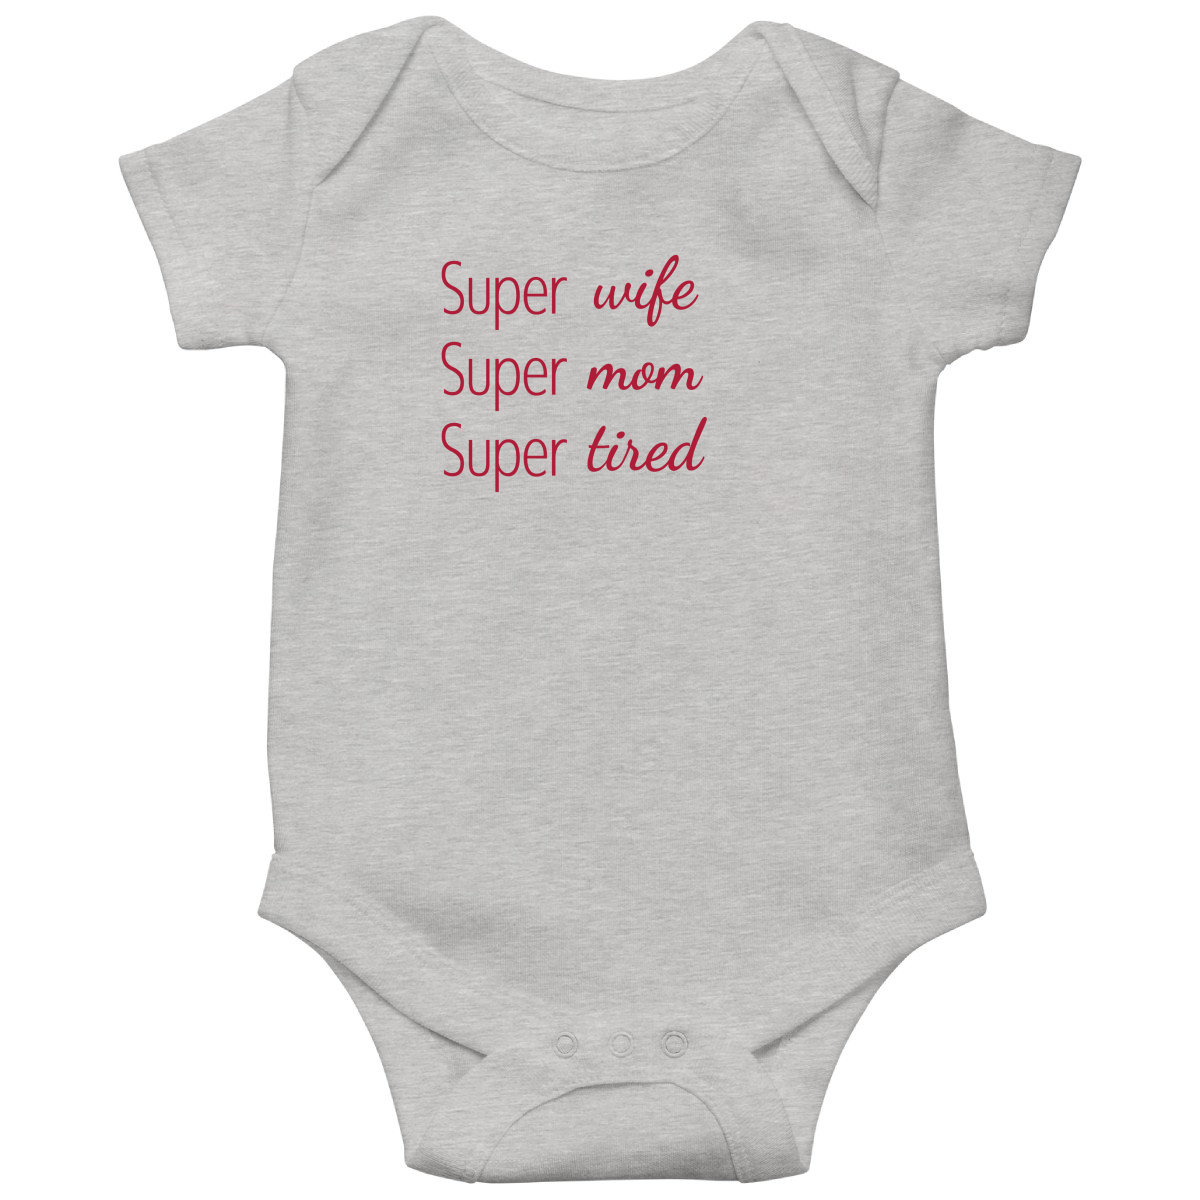 Super Mom Super Wife Super Tired Baby Bodysuits | Gray